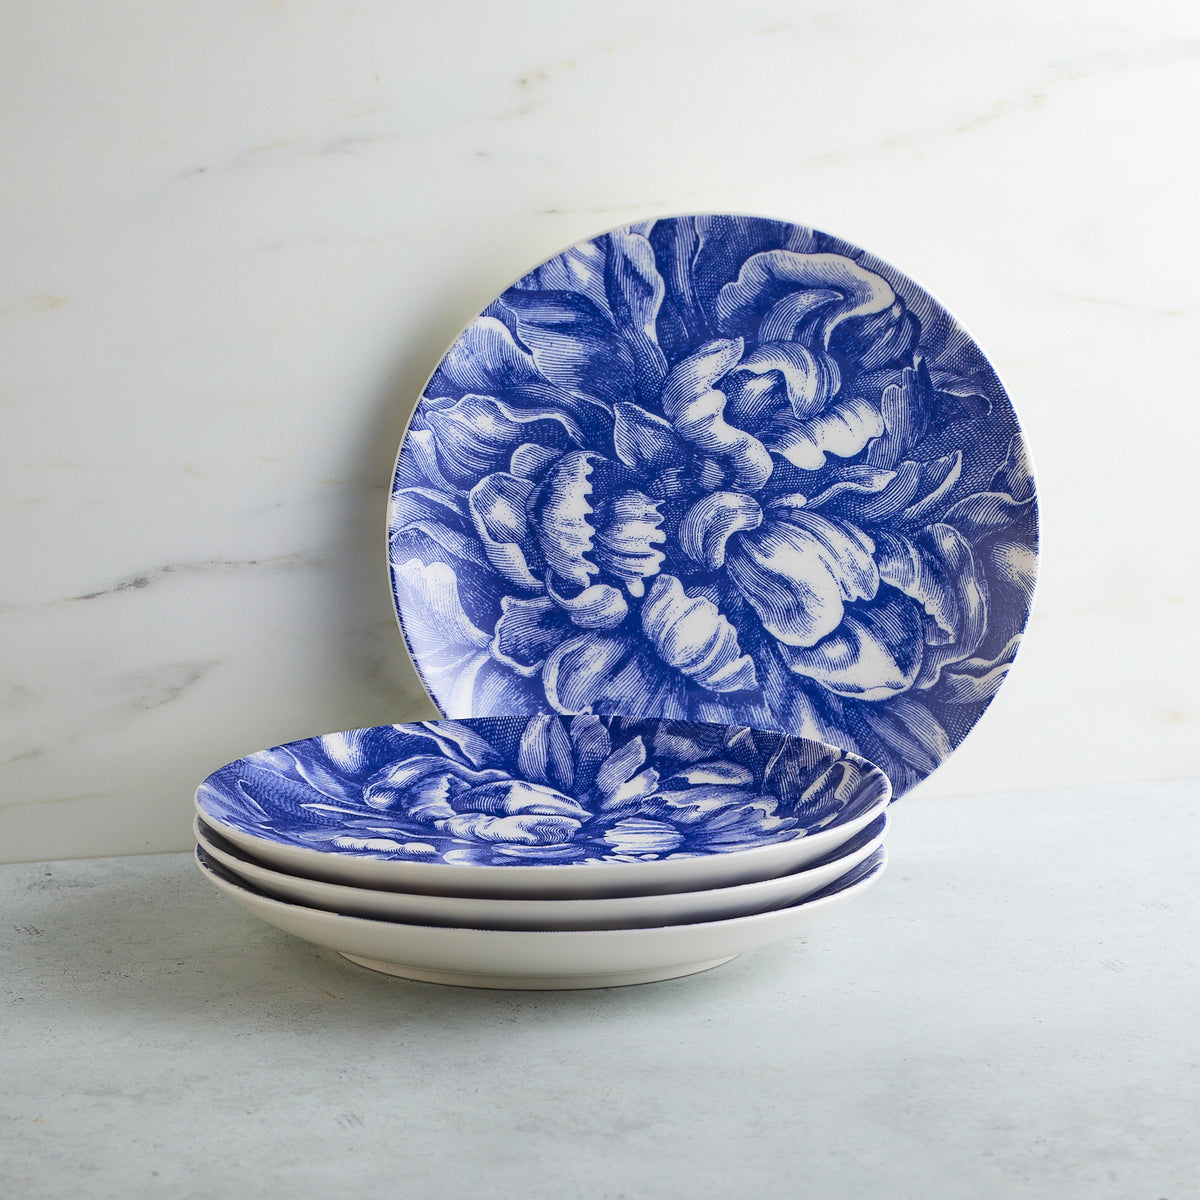 A stack of Caskata Artisanal Home Peony Coupe Salad Plates with a blue floral pattern, positioned against a marble background.